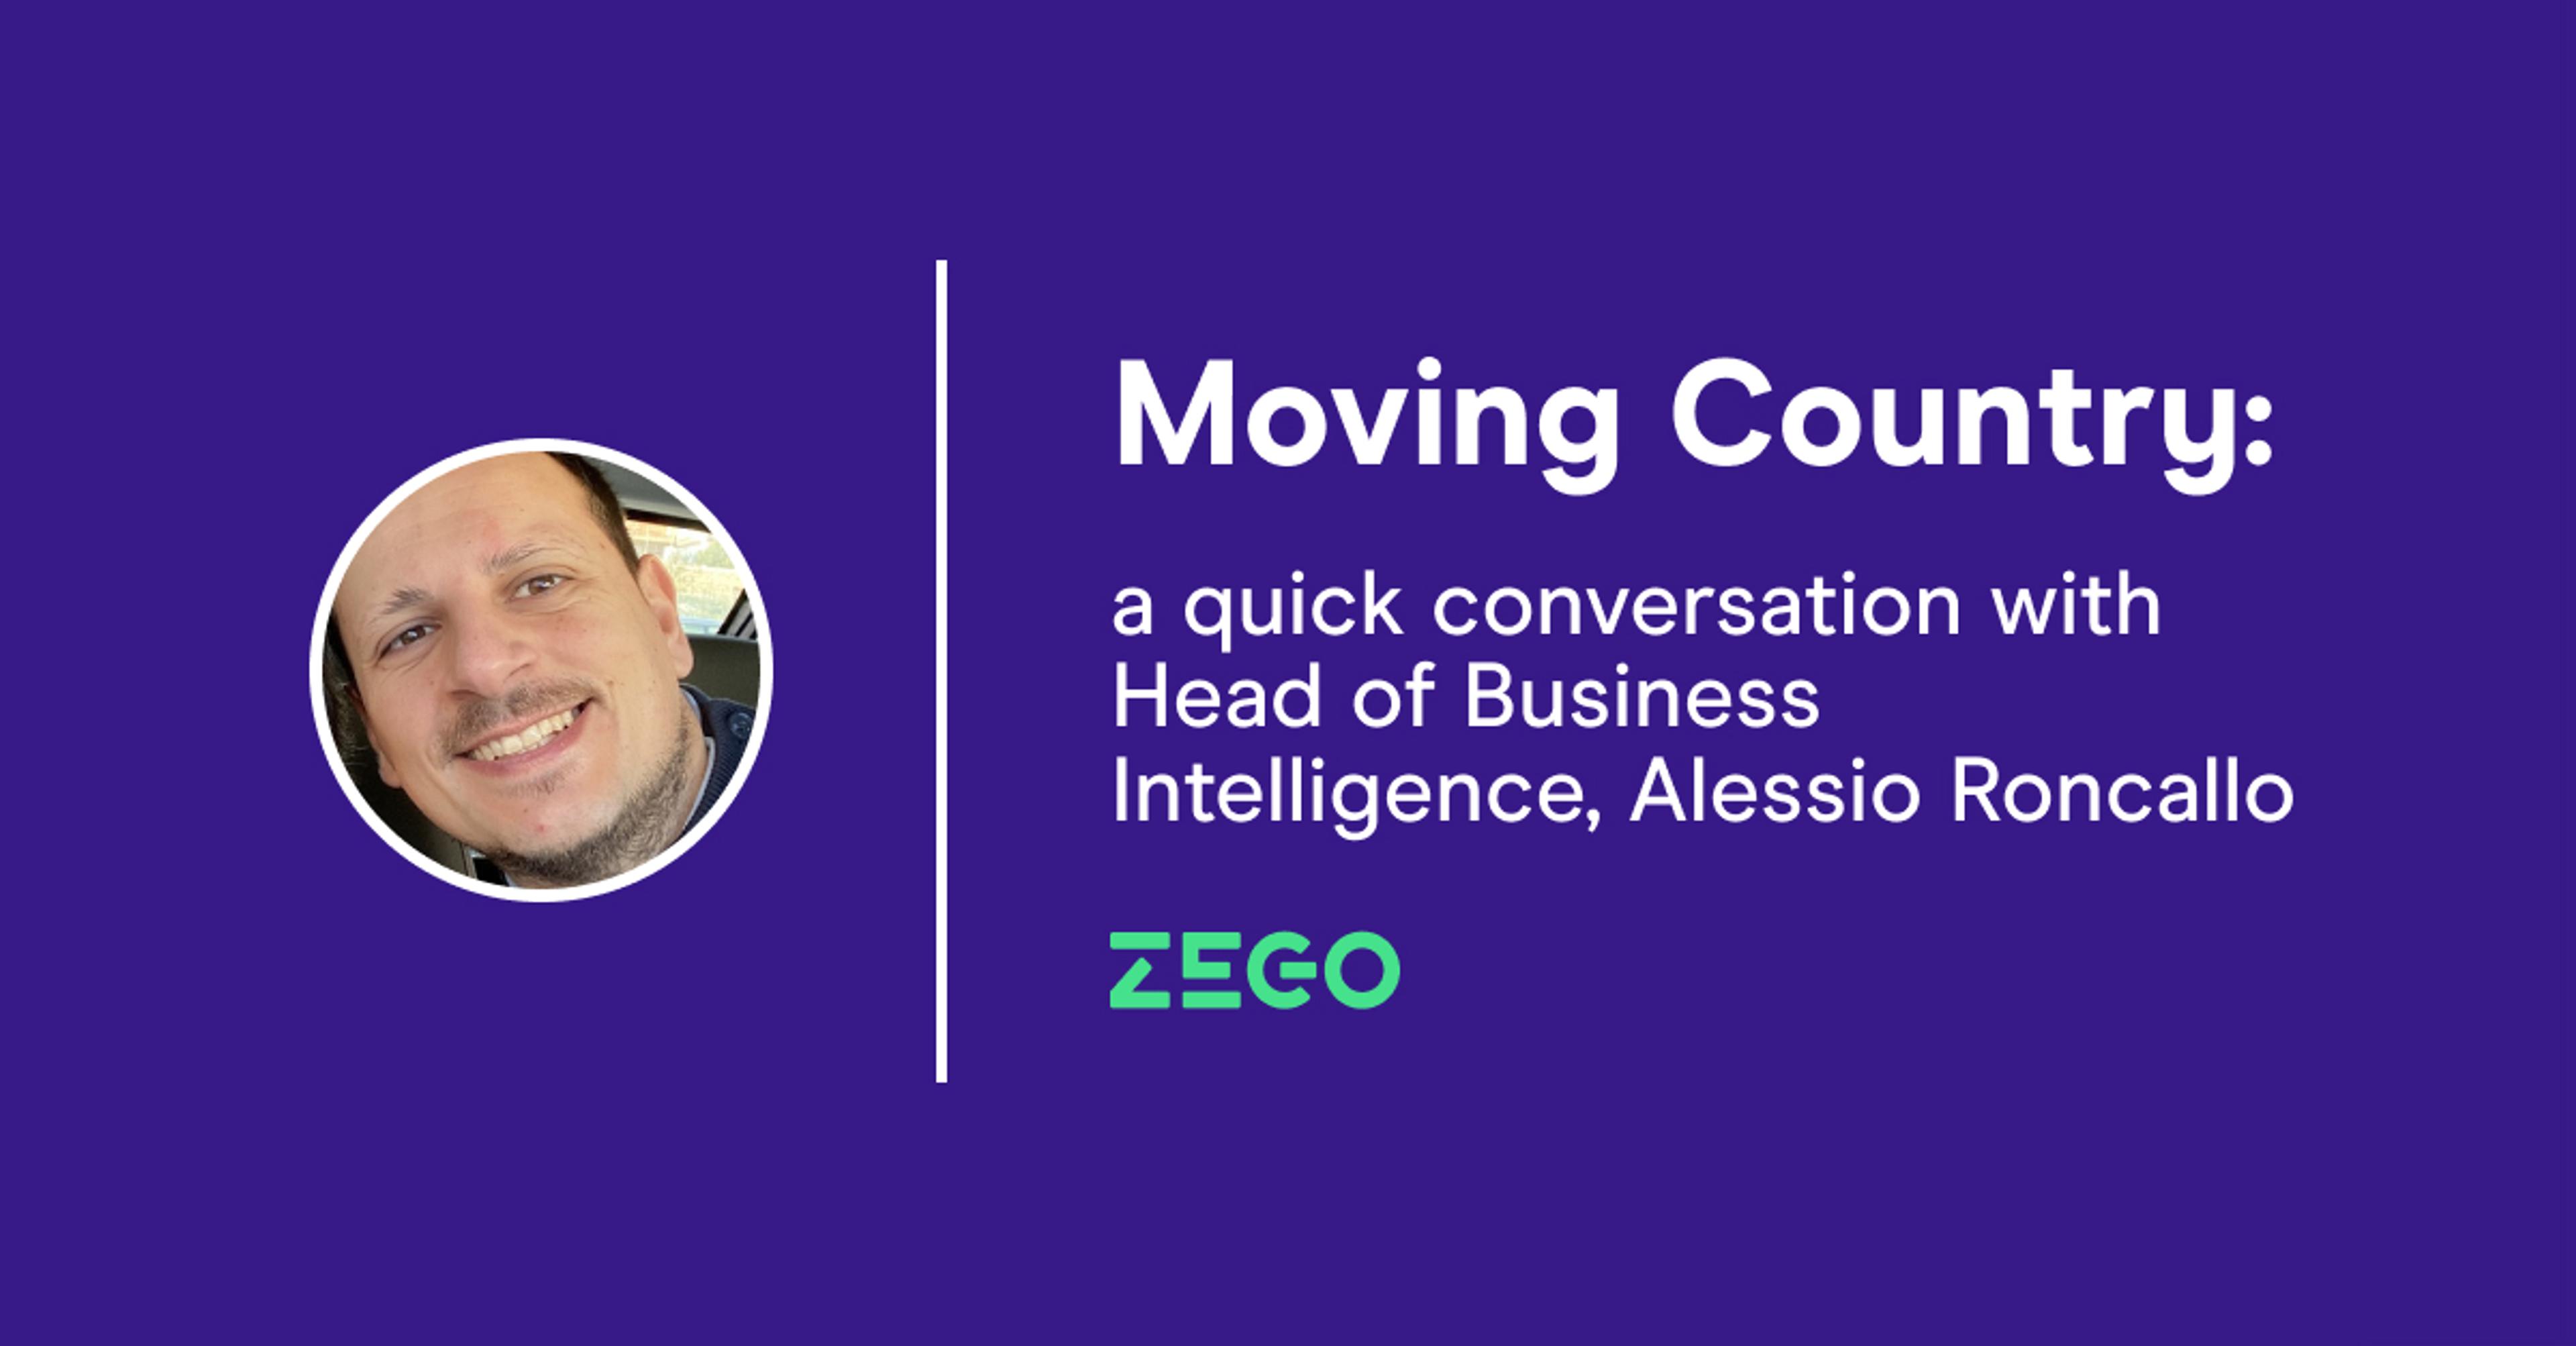 Moving Country: a quick conversation with Head of Business Intelligence, Alessio Roncallo